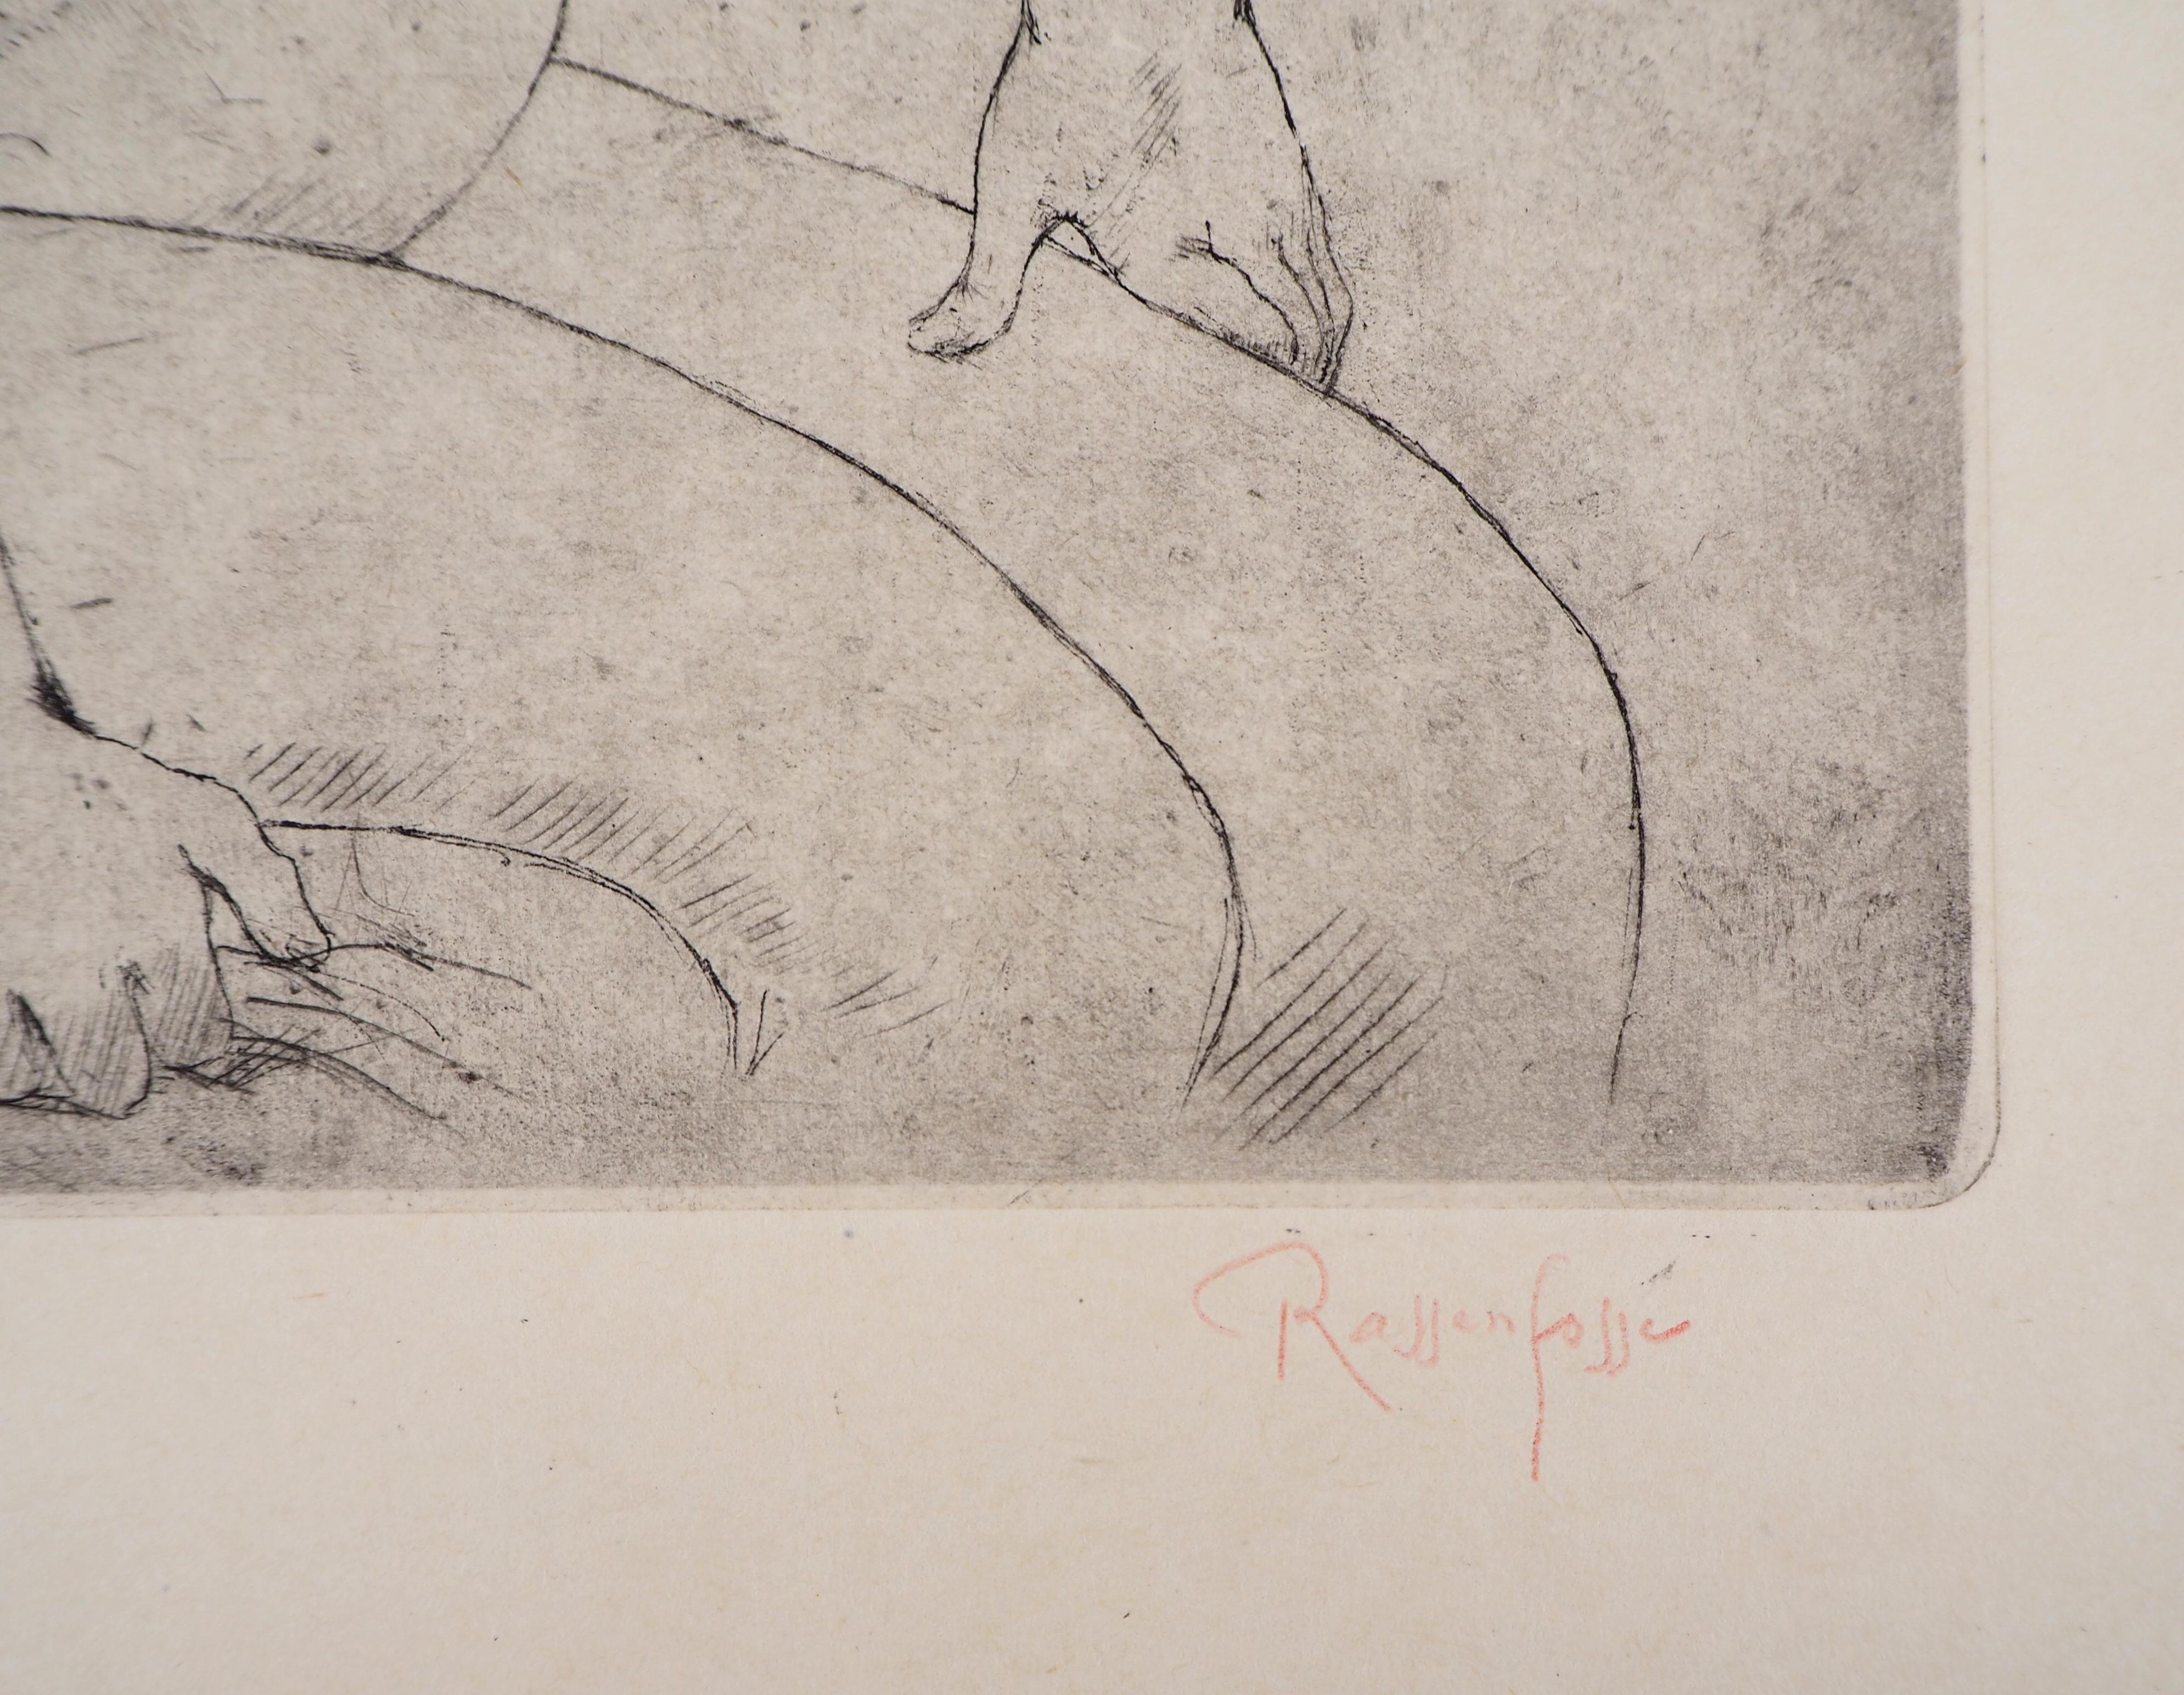 Attractive Nude - Original drypoint etching, Handsigned, 1928 - Print by Armand Rassenfosse